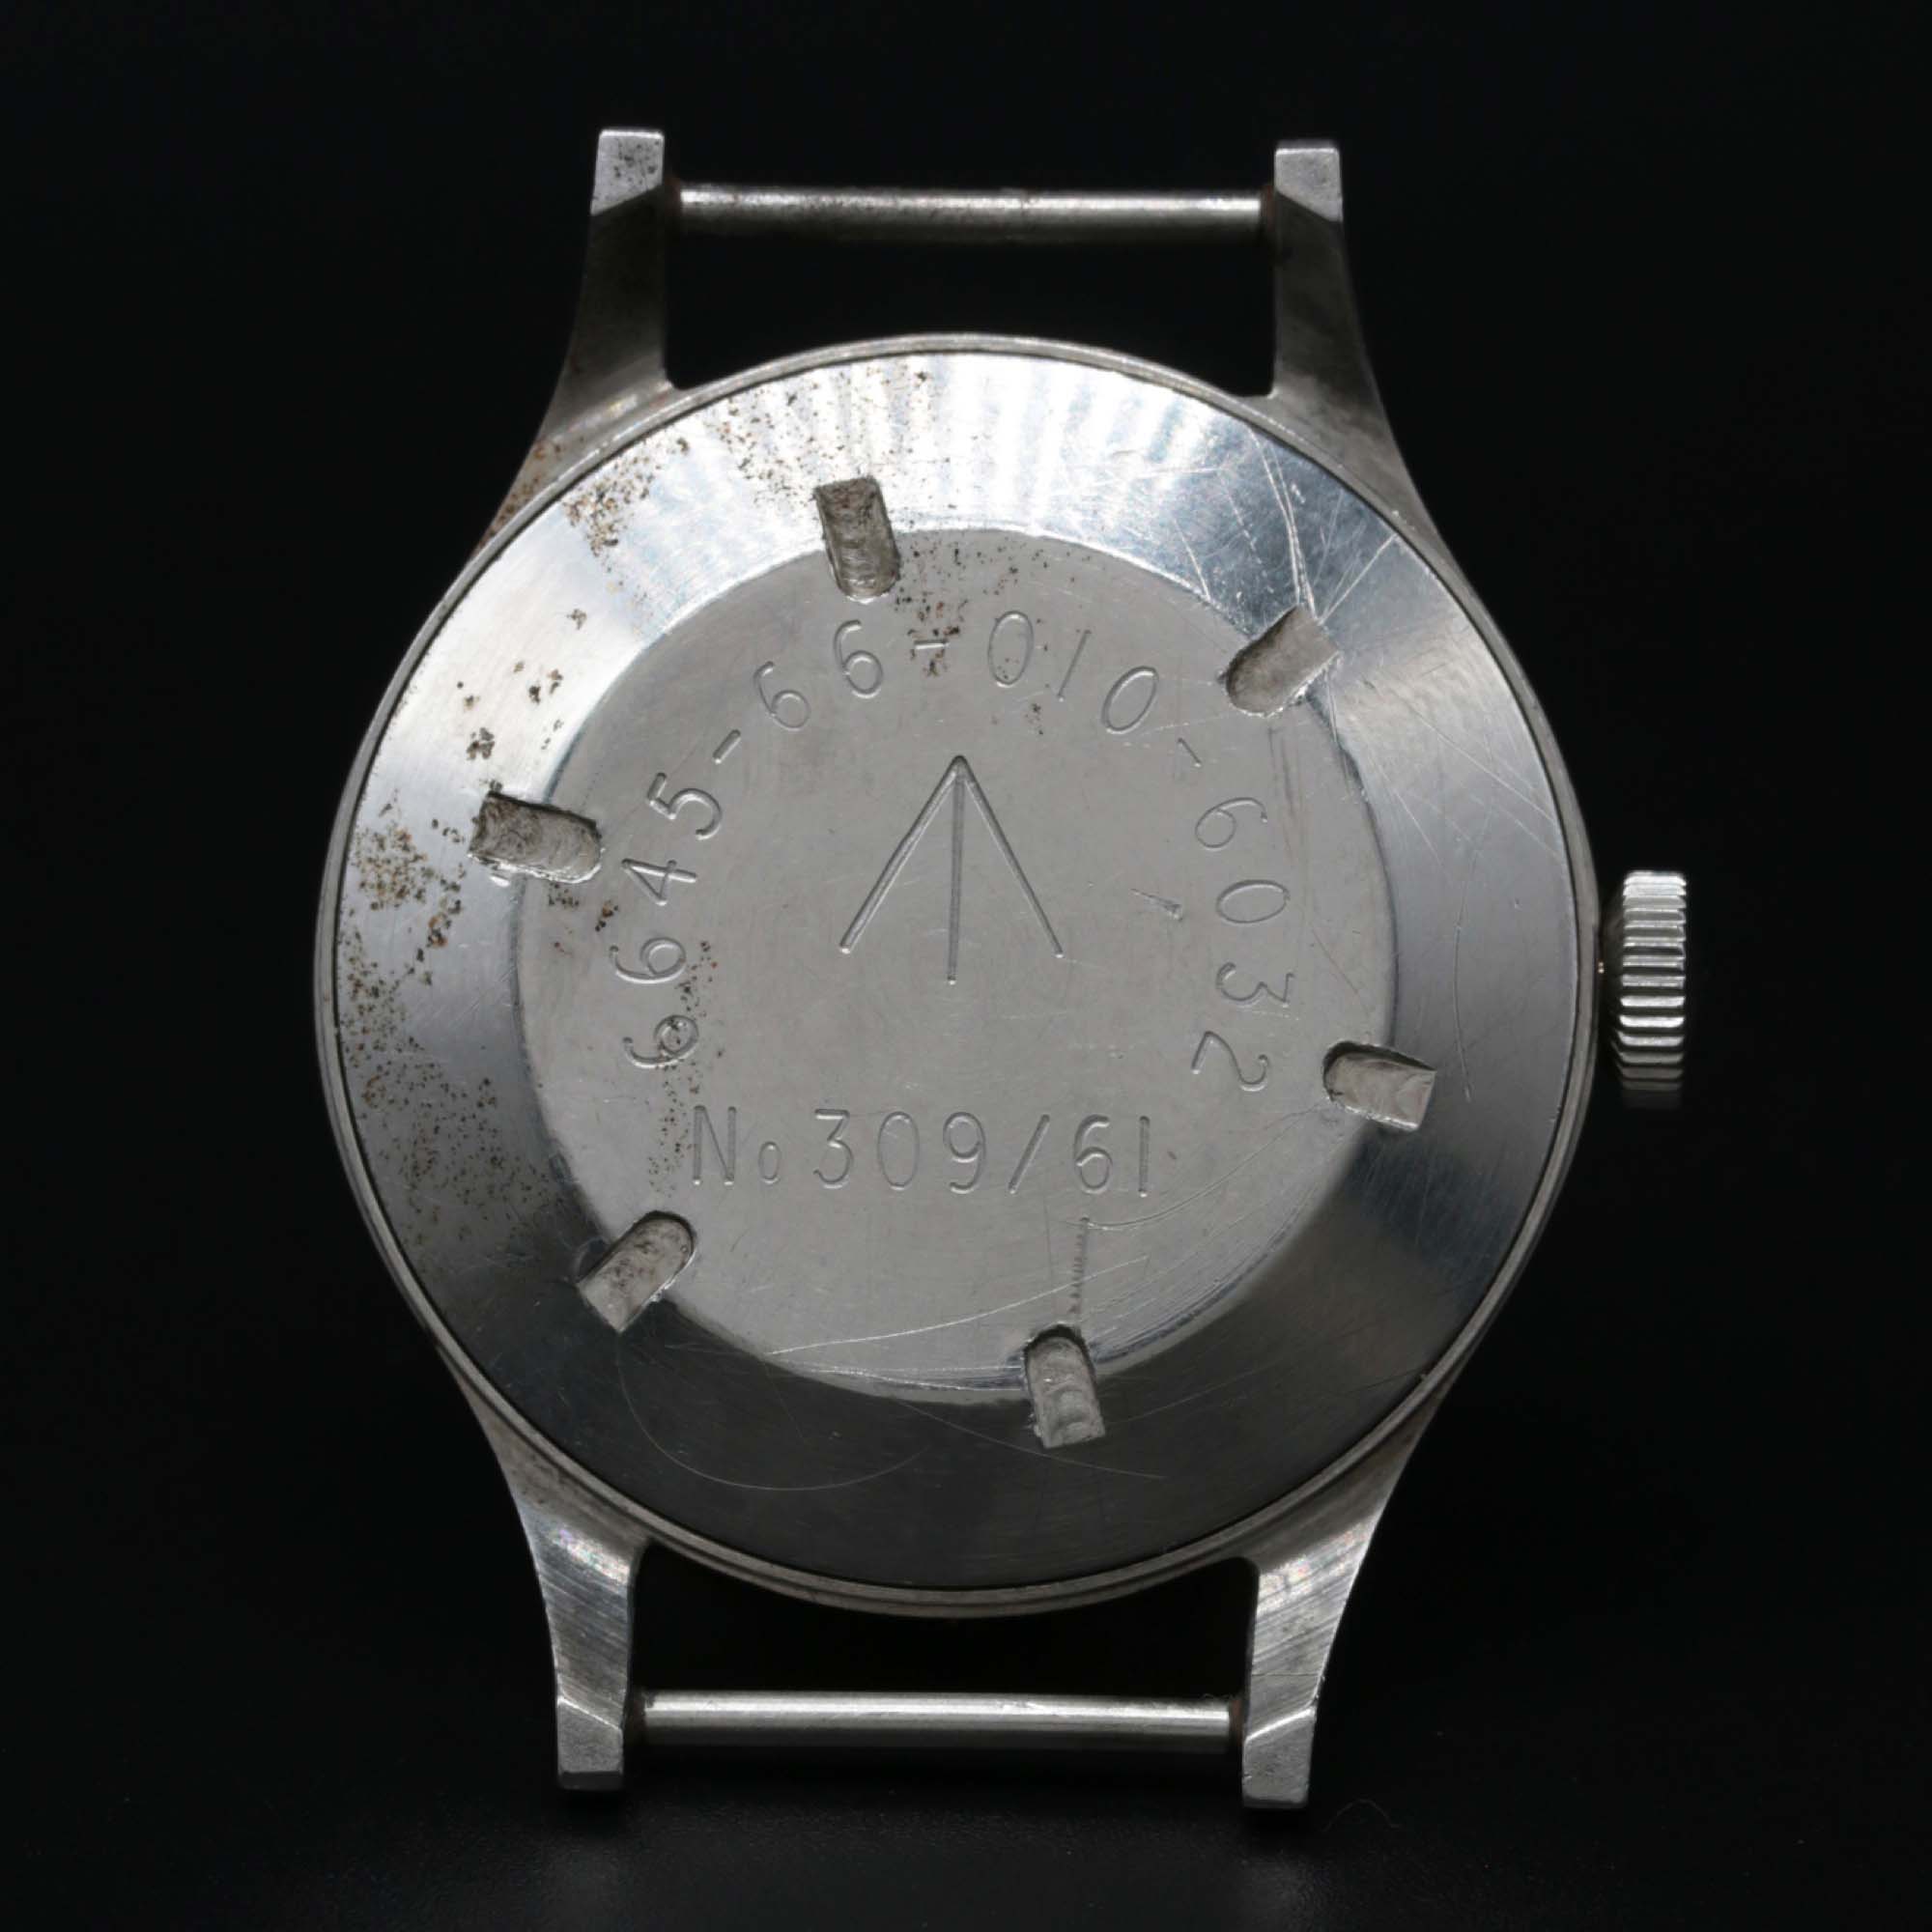 A VERY RARE GENTLEMAN'S STAINLESS STEEL AUSTRALIAN MILITARY SMITHS DE LUXE WRIST WATCH DATED 1961, - Image 2 of 11